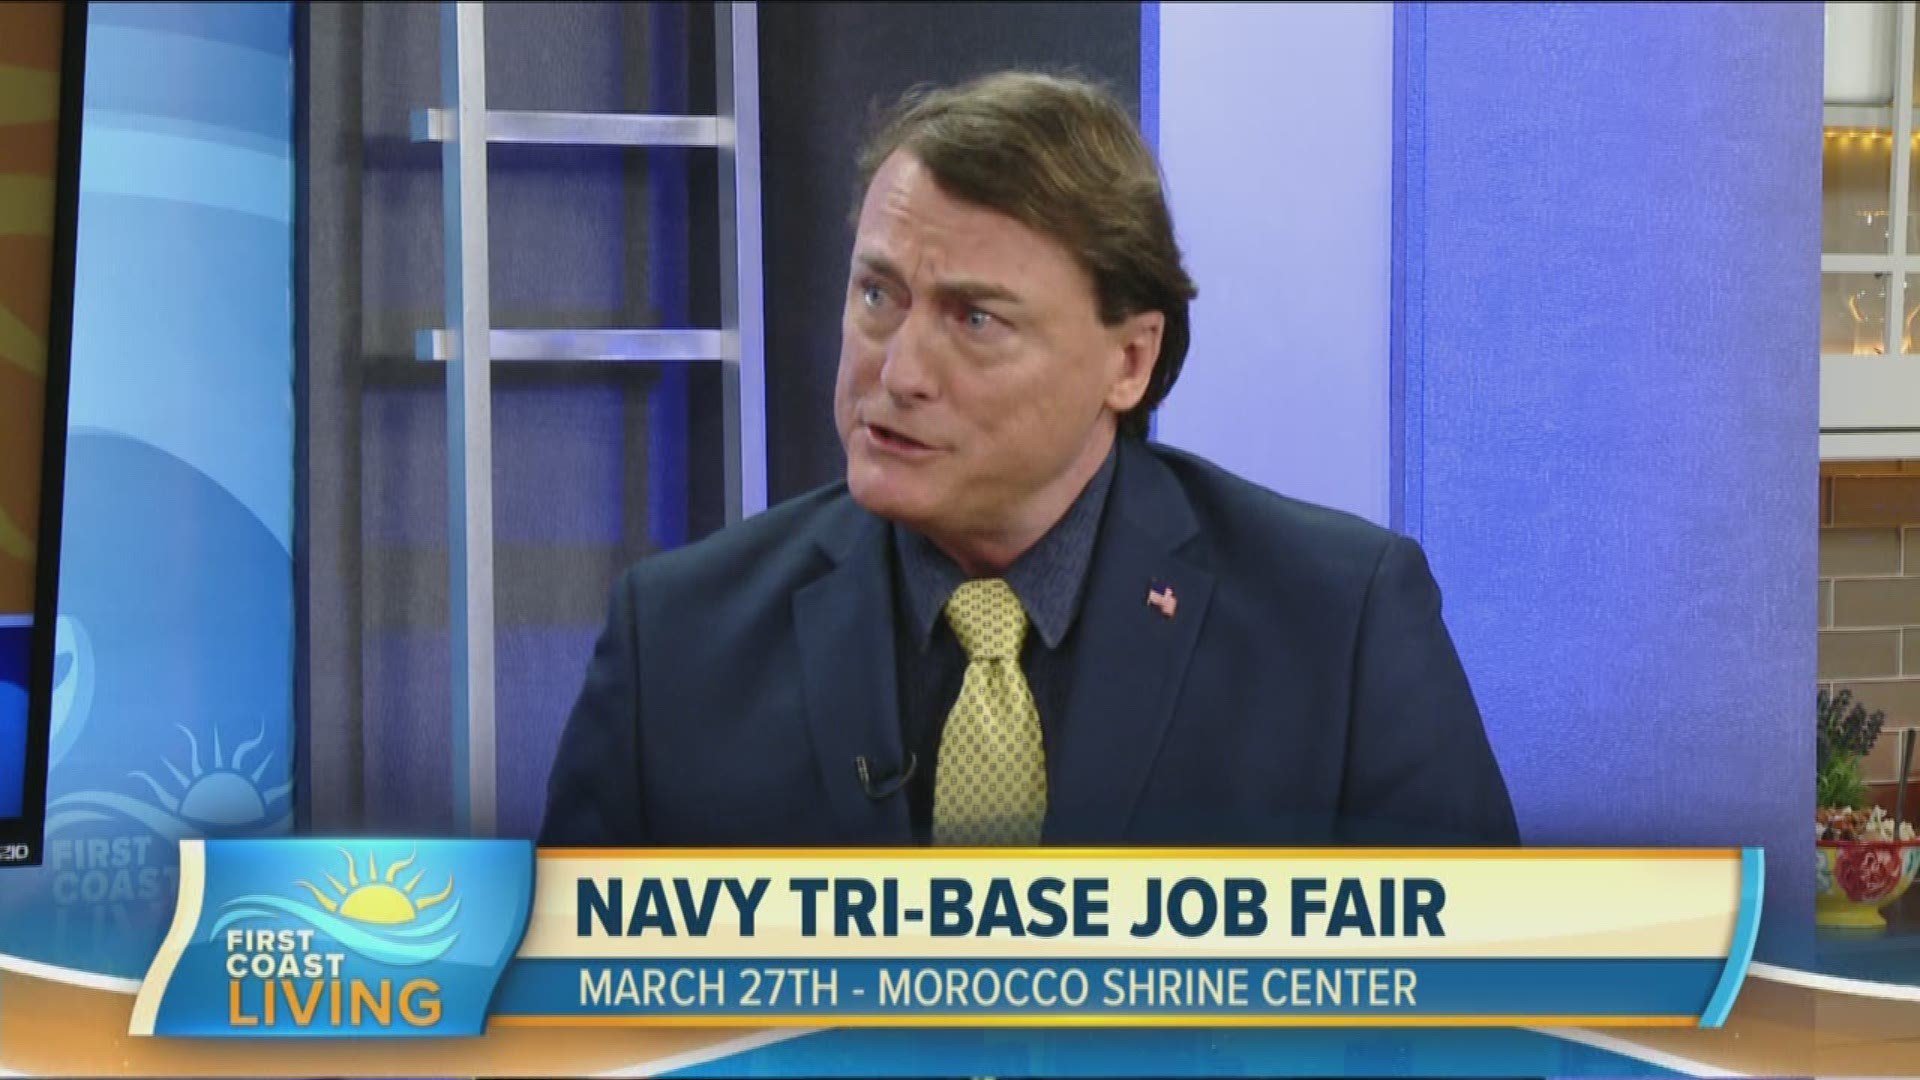 Learn more about the Navy Tri Base Job Fair happening March 27th at the Morocco Shrine Center.